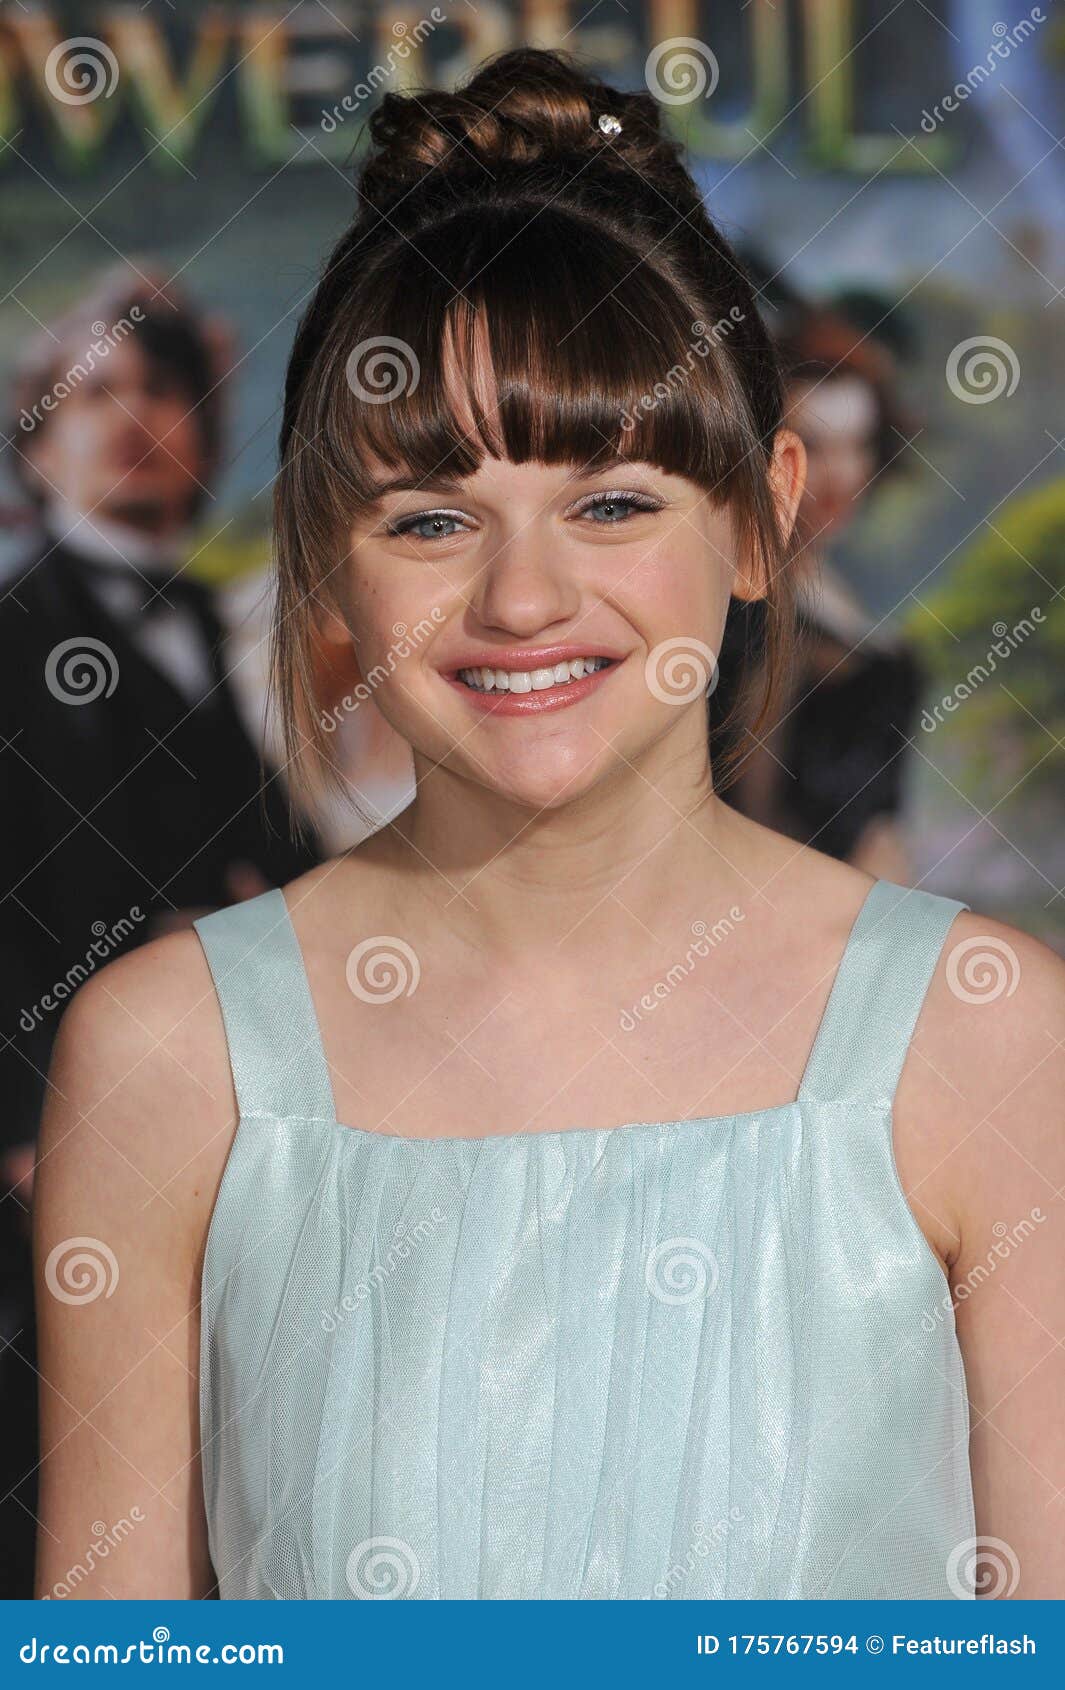 joey king oz the great and powerful premiere